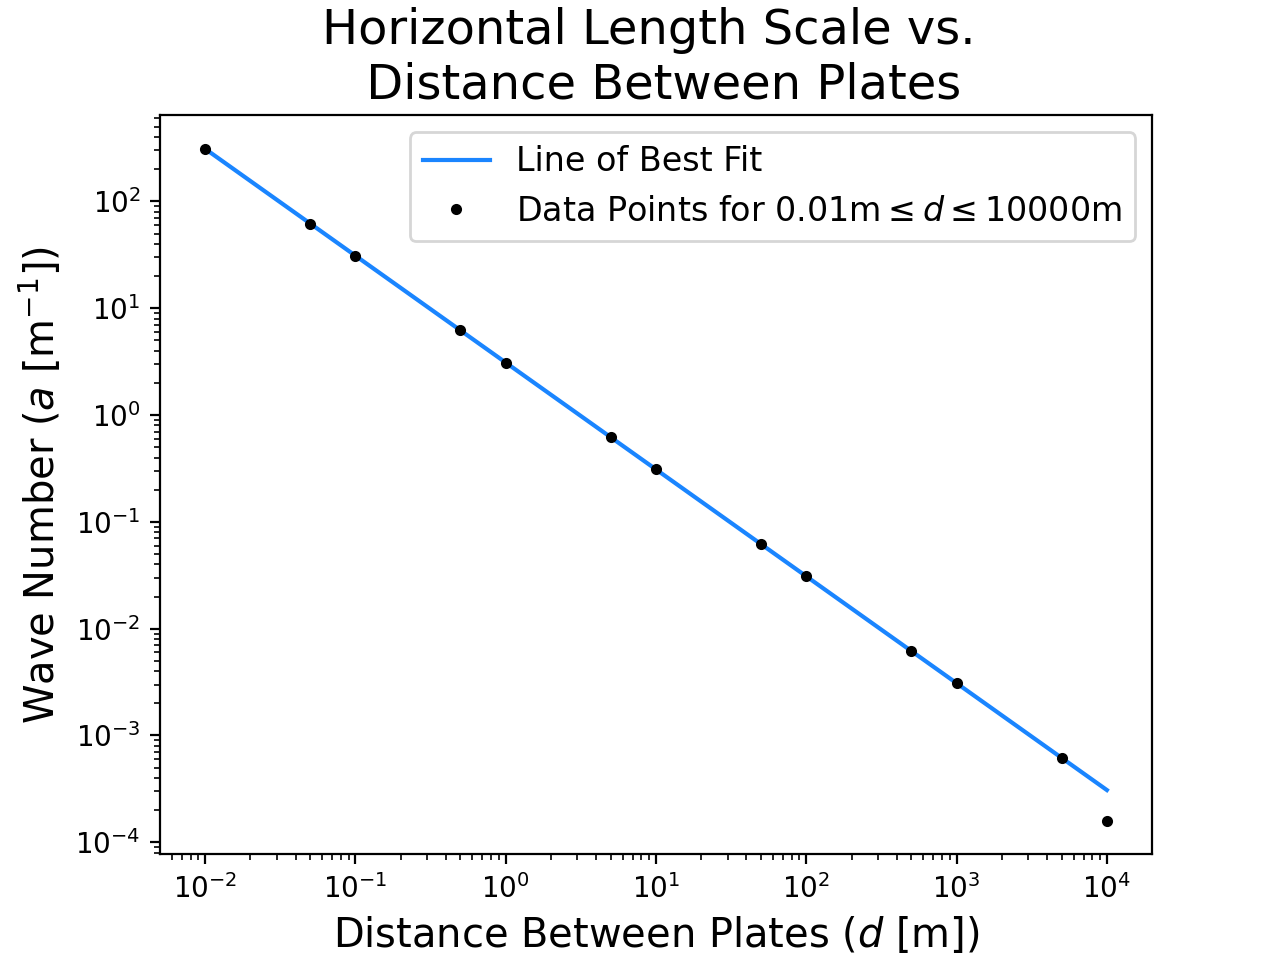 Figure 3b. Comparing the horizontal length scale of the disturbance for different distances between the plates. The slope of the line of best fit is -1.00.